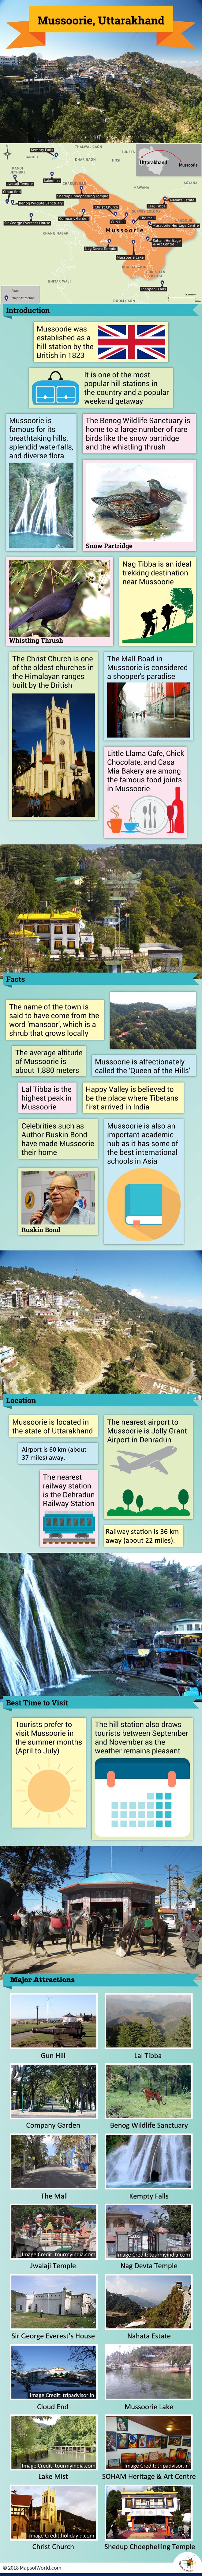 Infographic Depicting Mussoorie Tourist Attractions